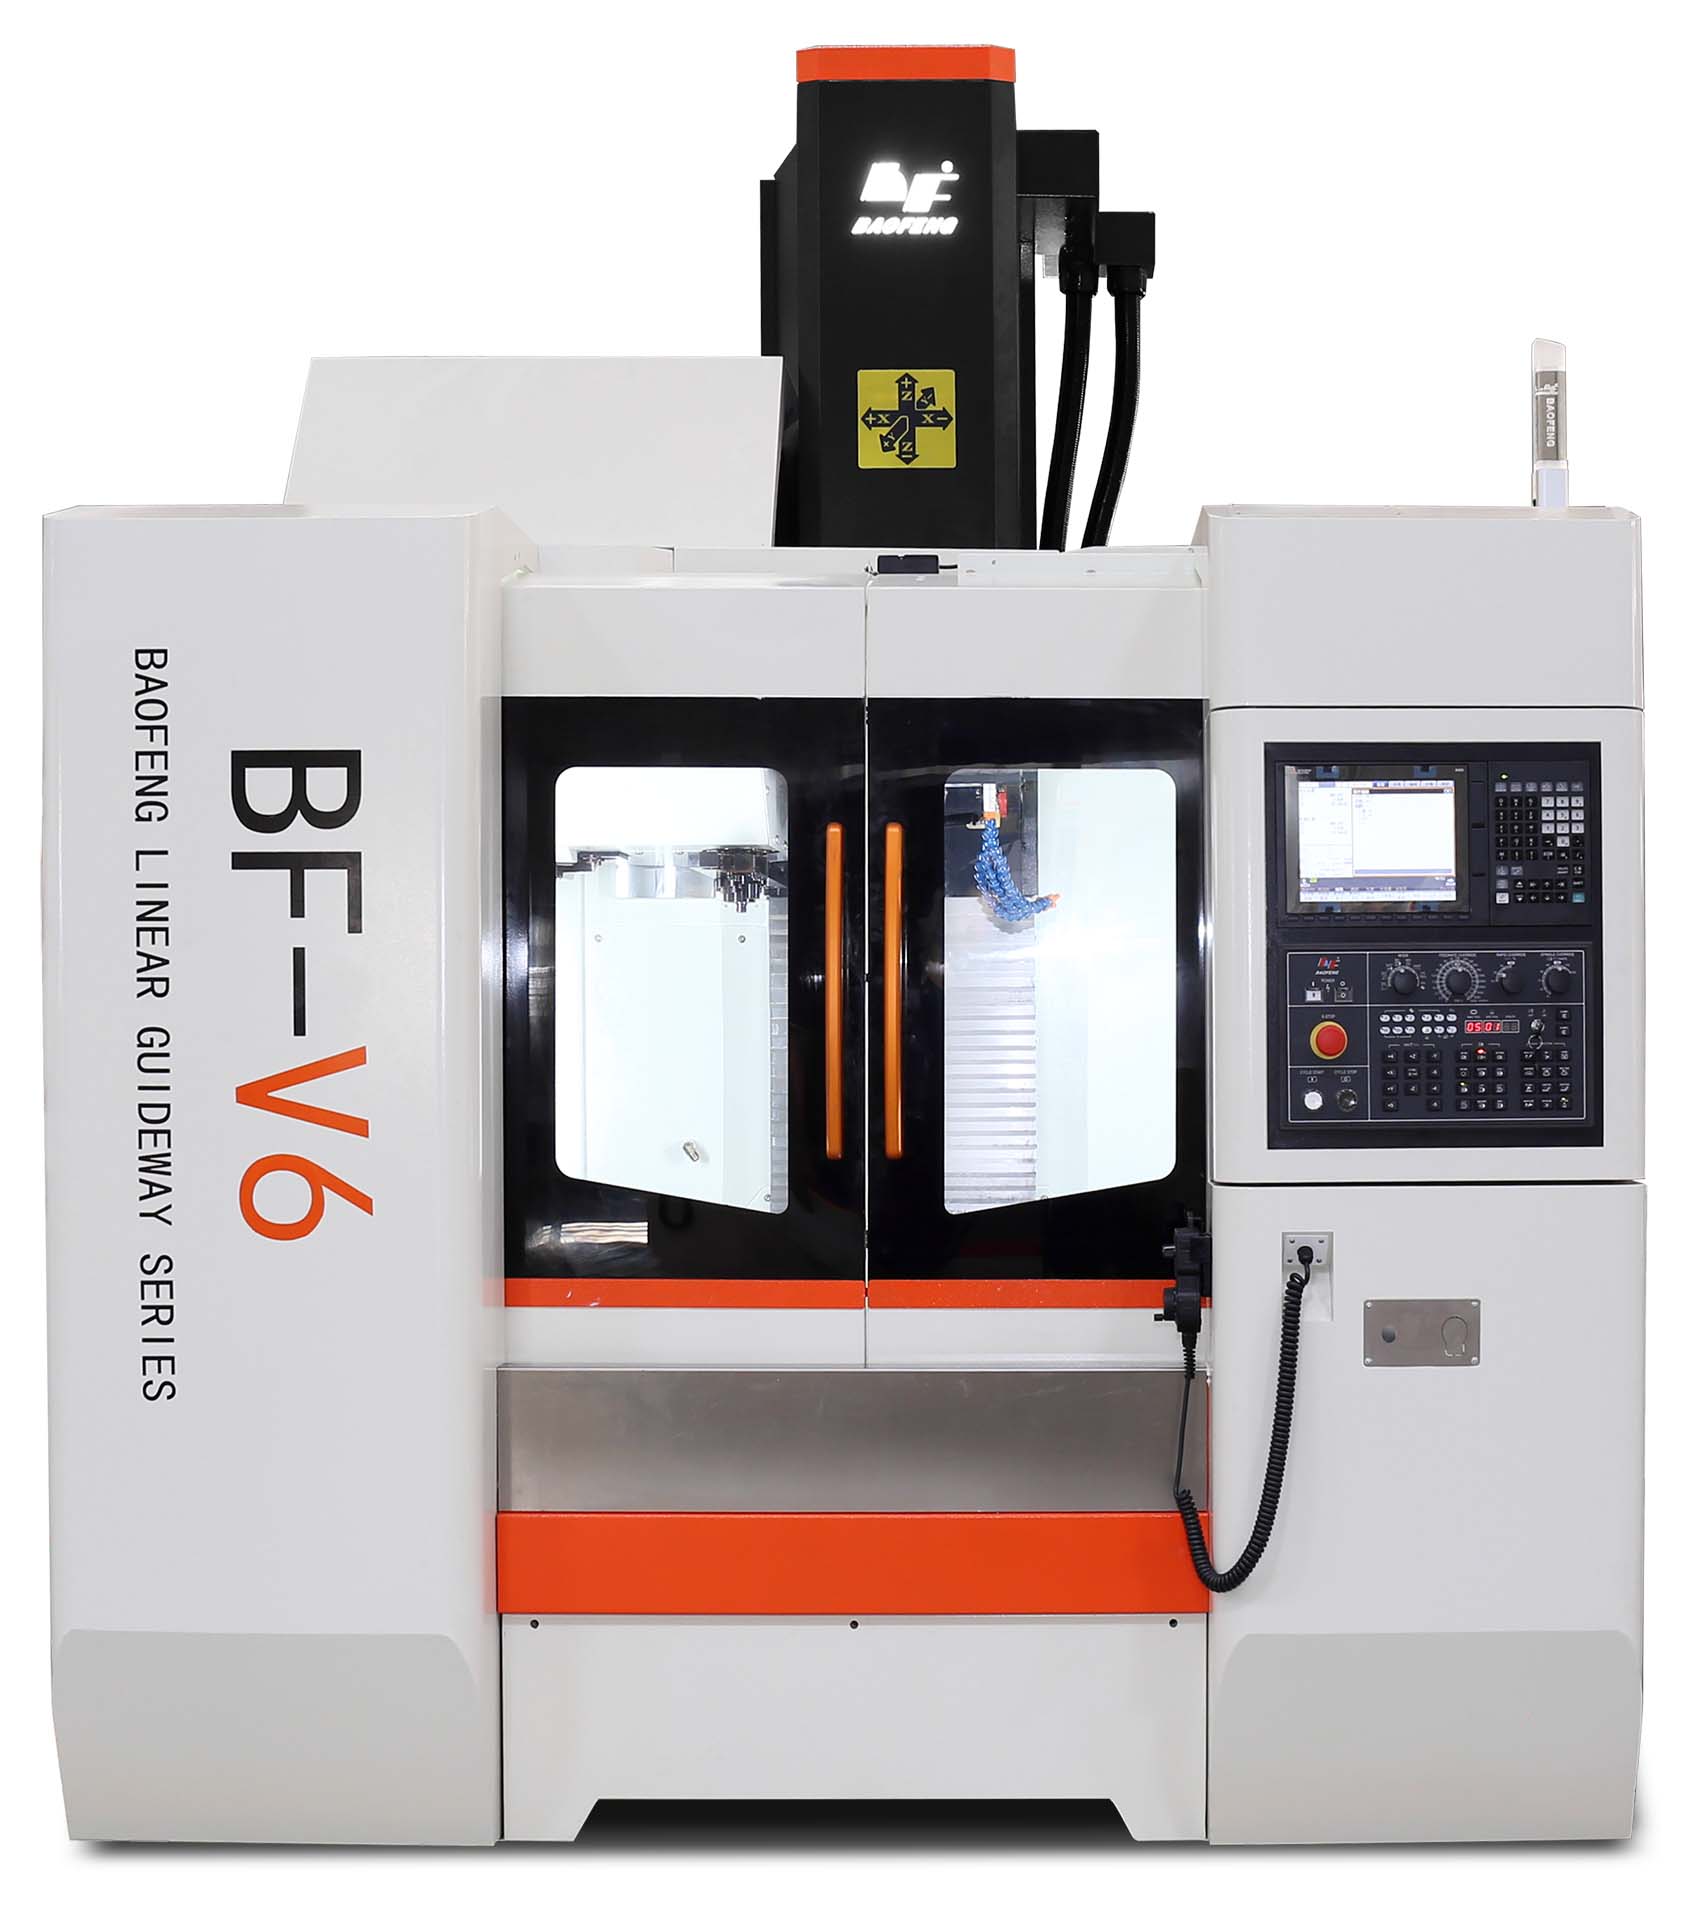 BF-V6--3 Axis Vertical Machining Center